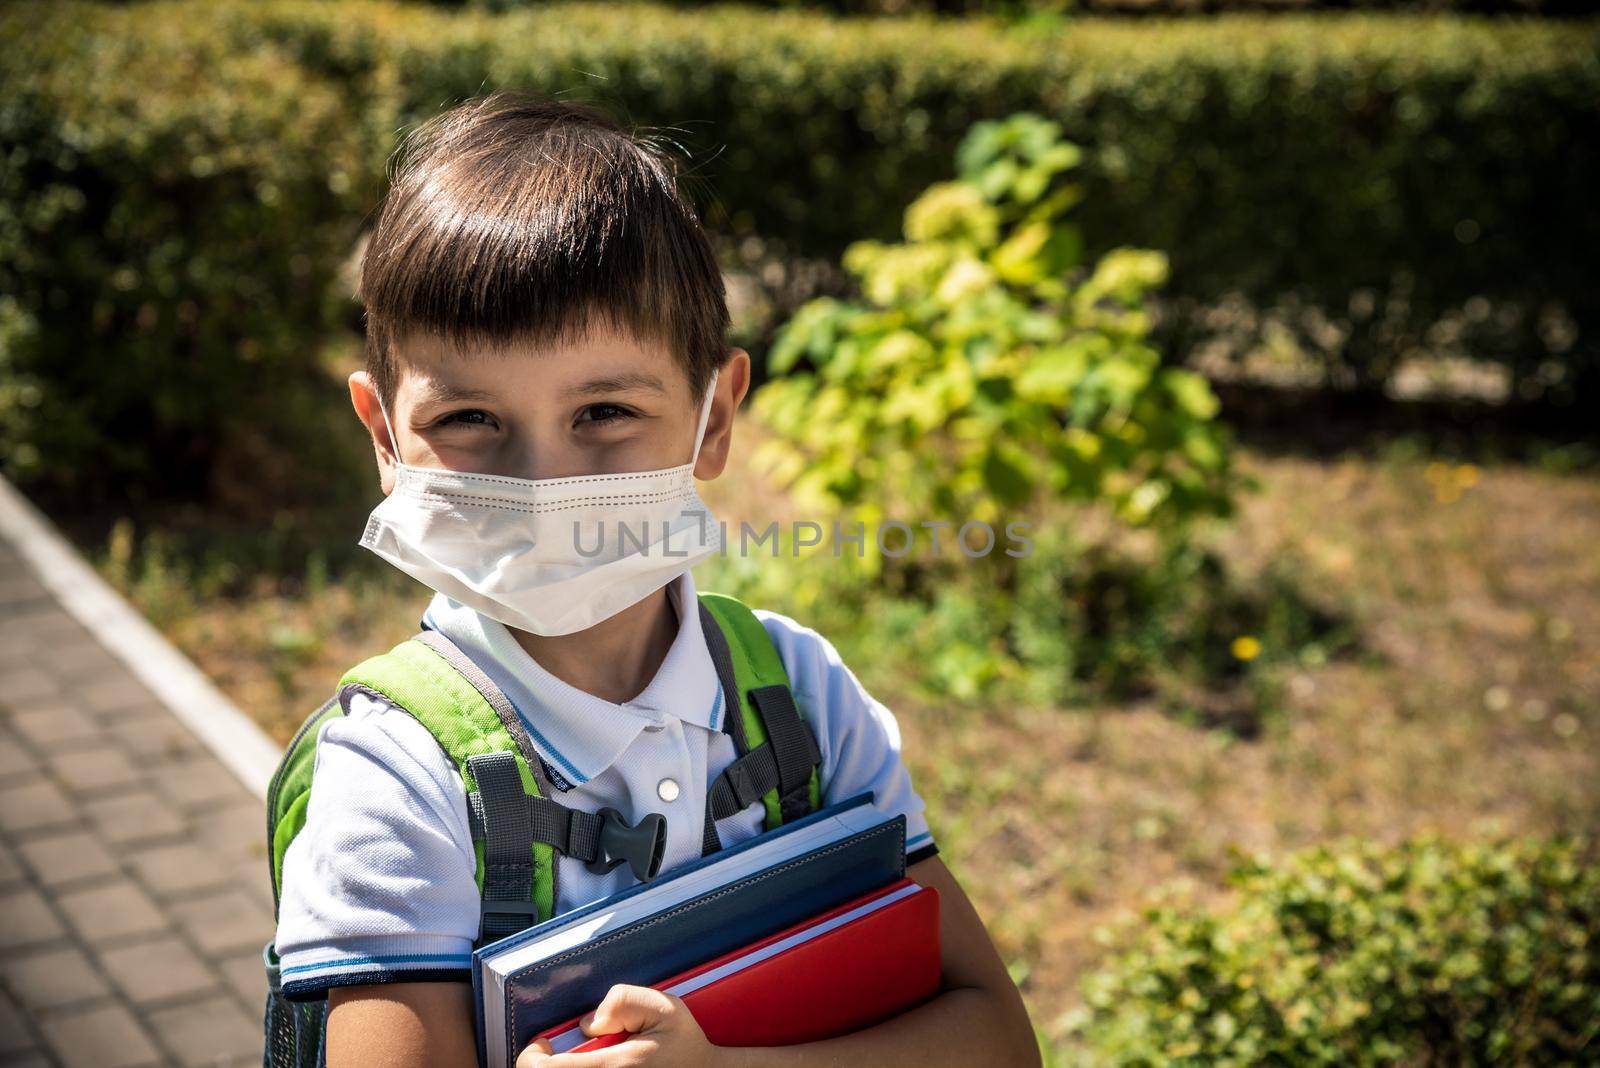 Child wearing face mask going at reopen school after covid-19 quarantine and lockdown. It is new normal for protection and prevention while outbreak of coronavirus or flu. Kids back to school concept.